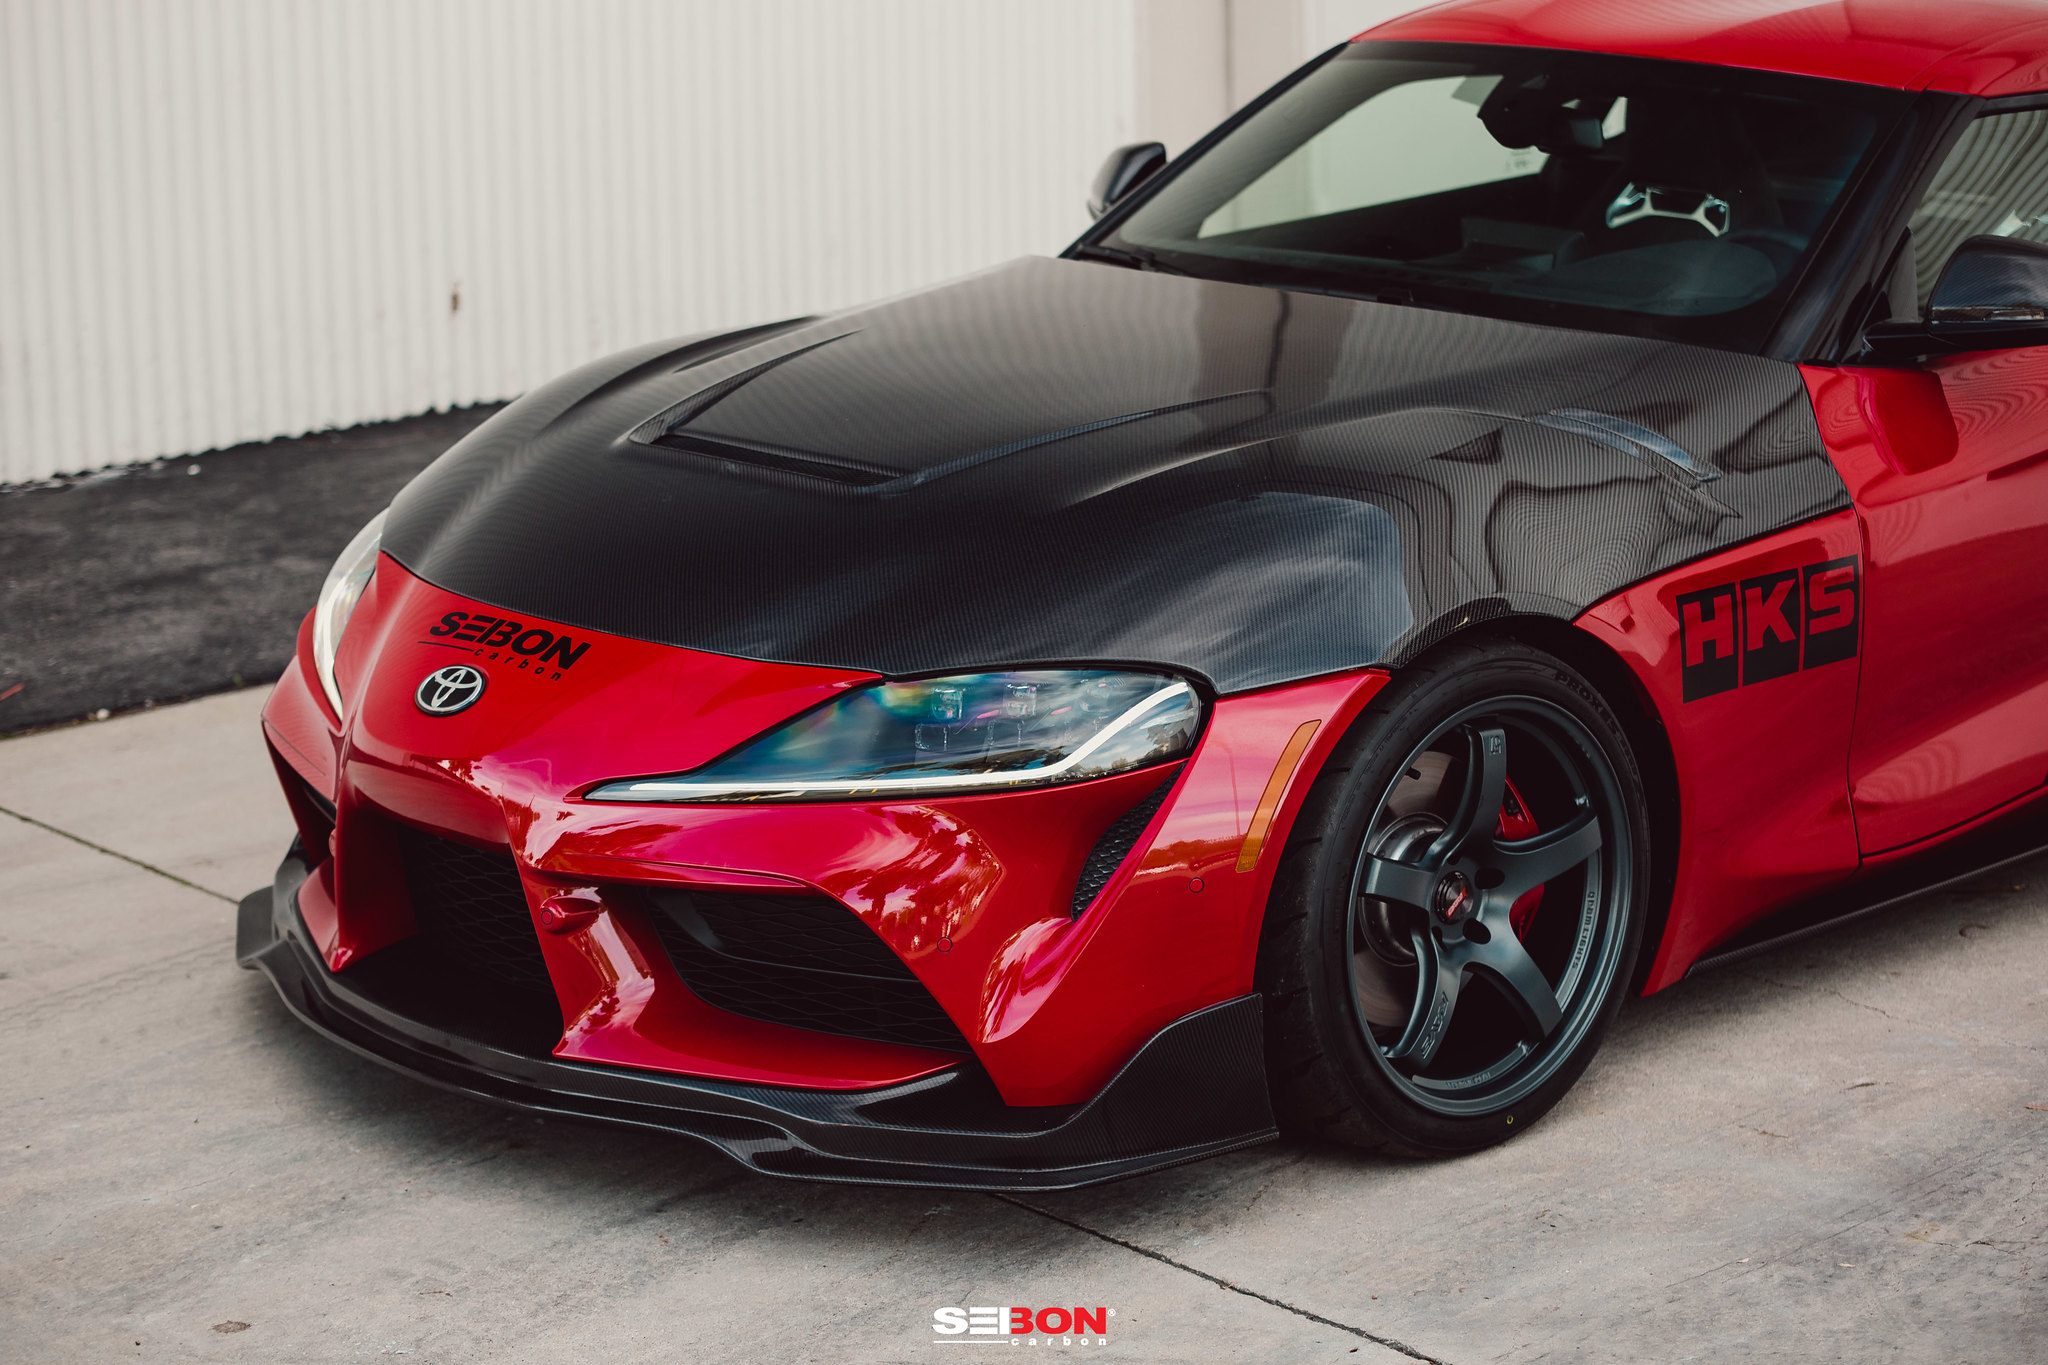 New Product Vs Style Double Sided Carbon Fiber Hood For The 2020 Toyota Supra Seibon Carbon